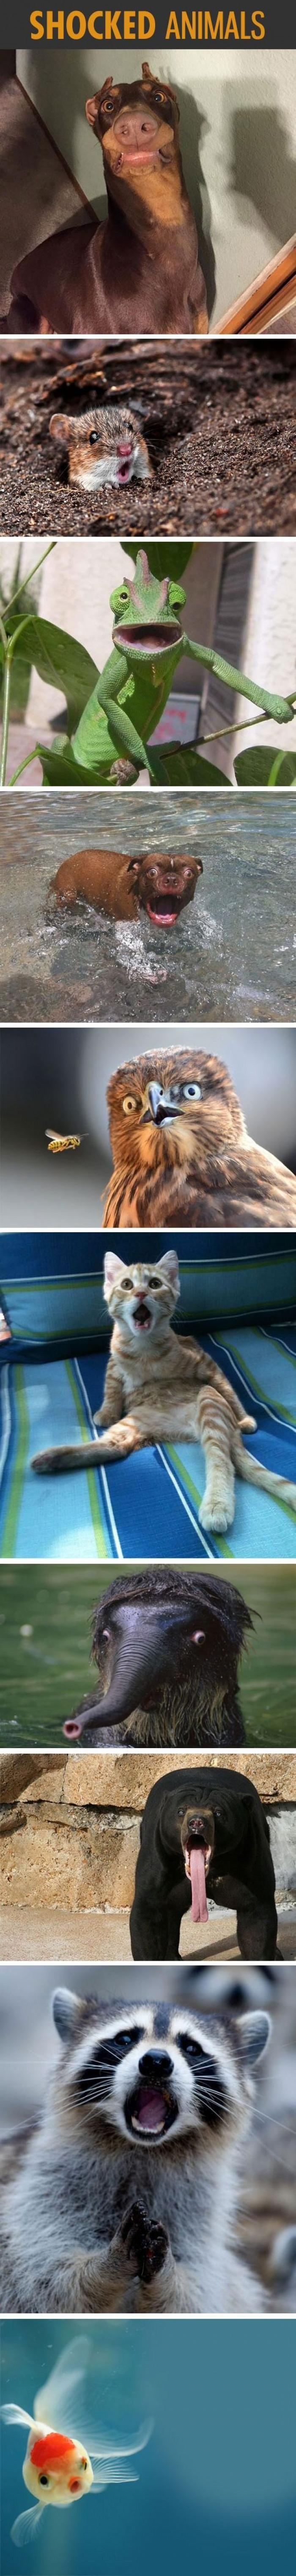 Shocked Animals. Number 8 Is Our Fav!